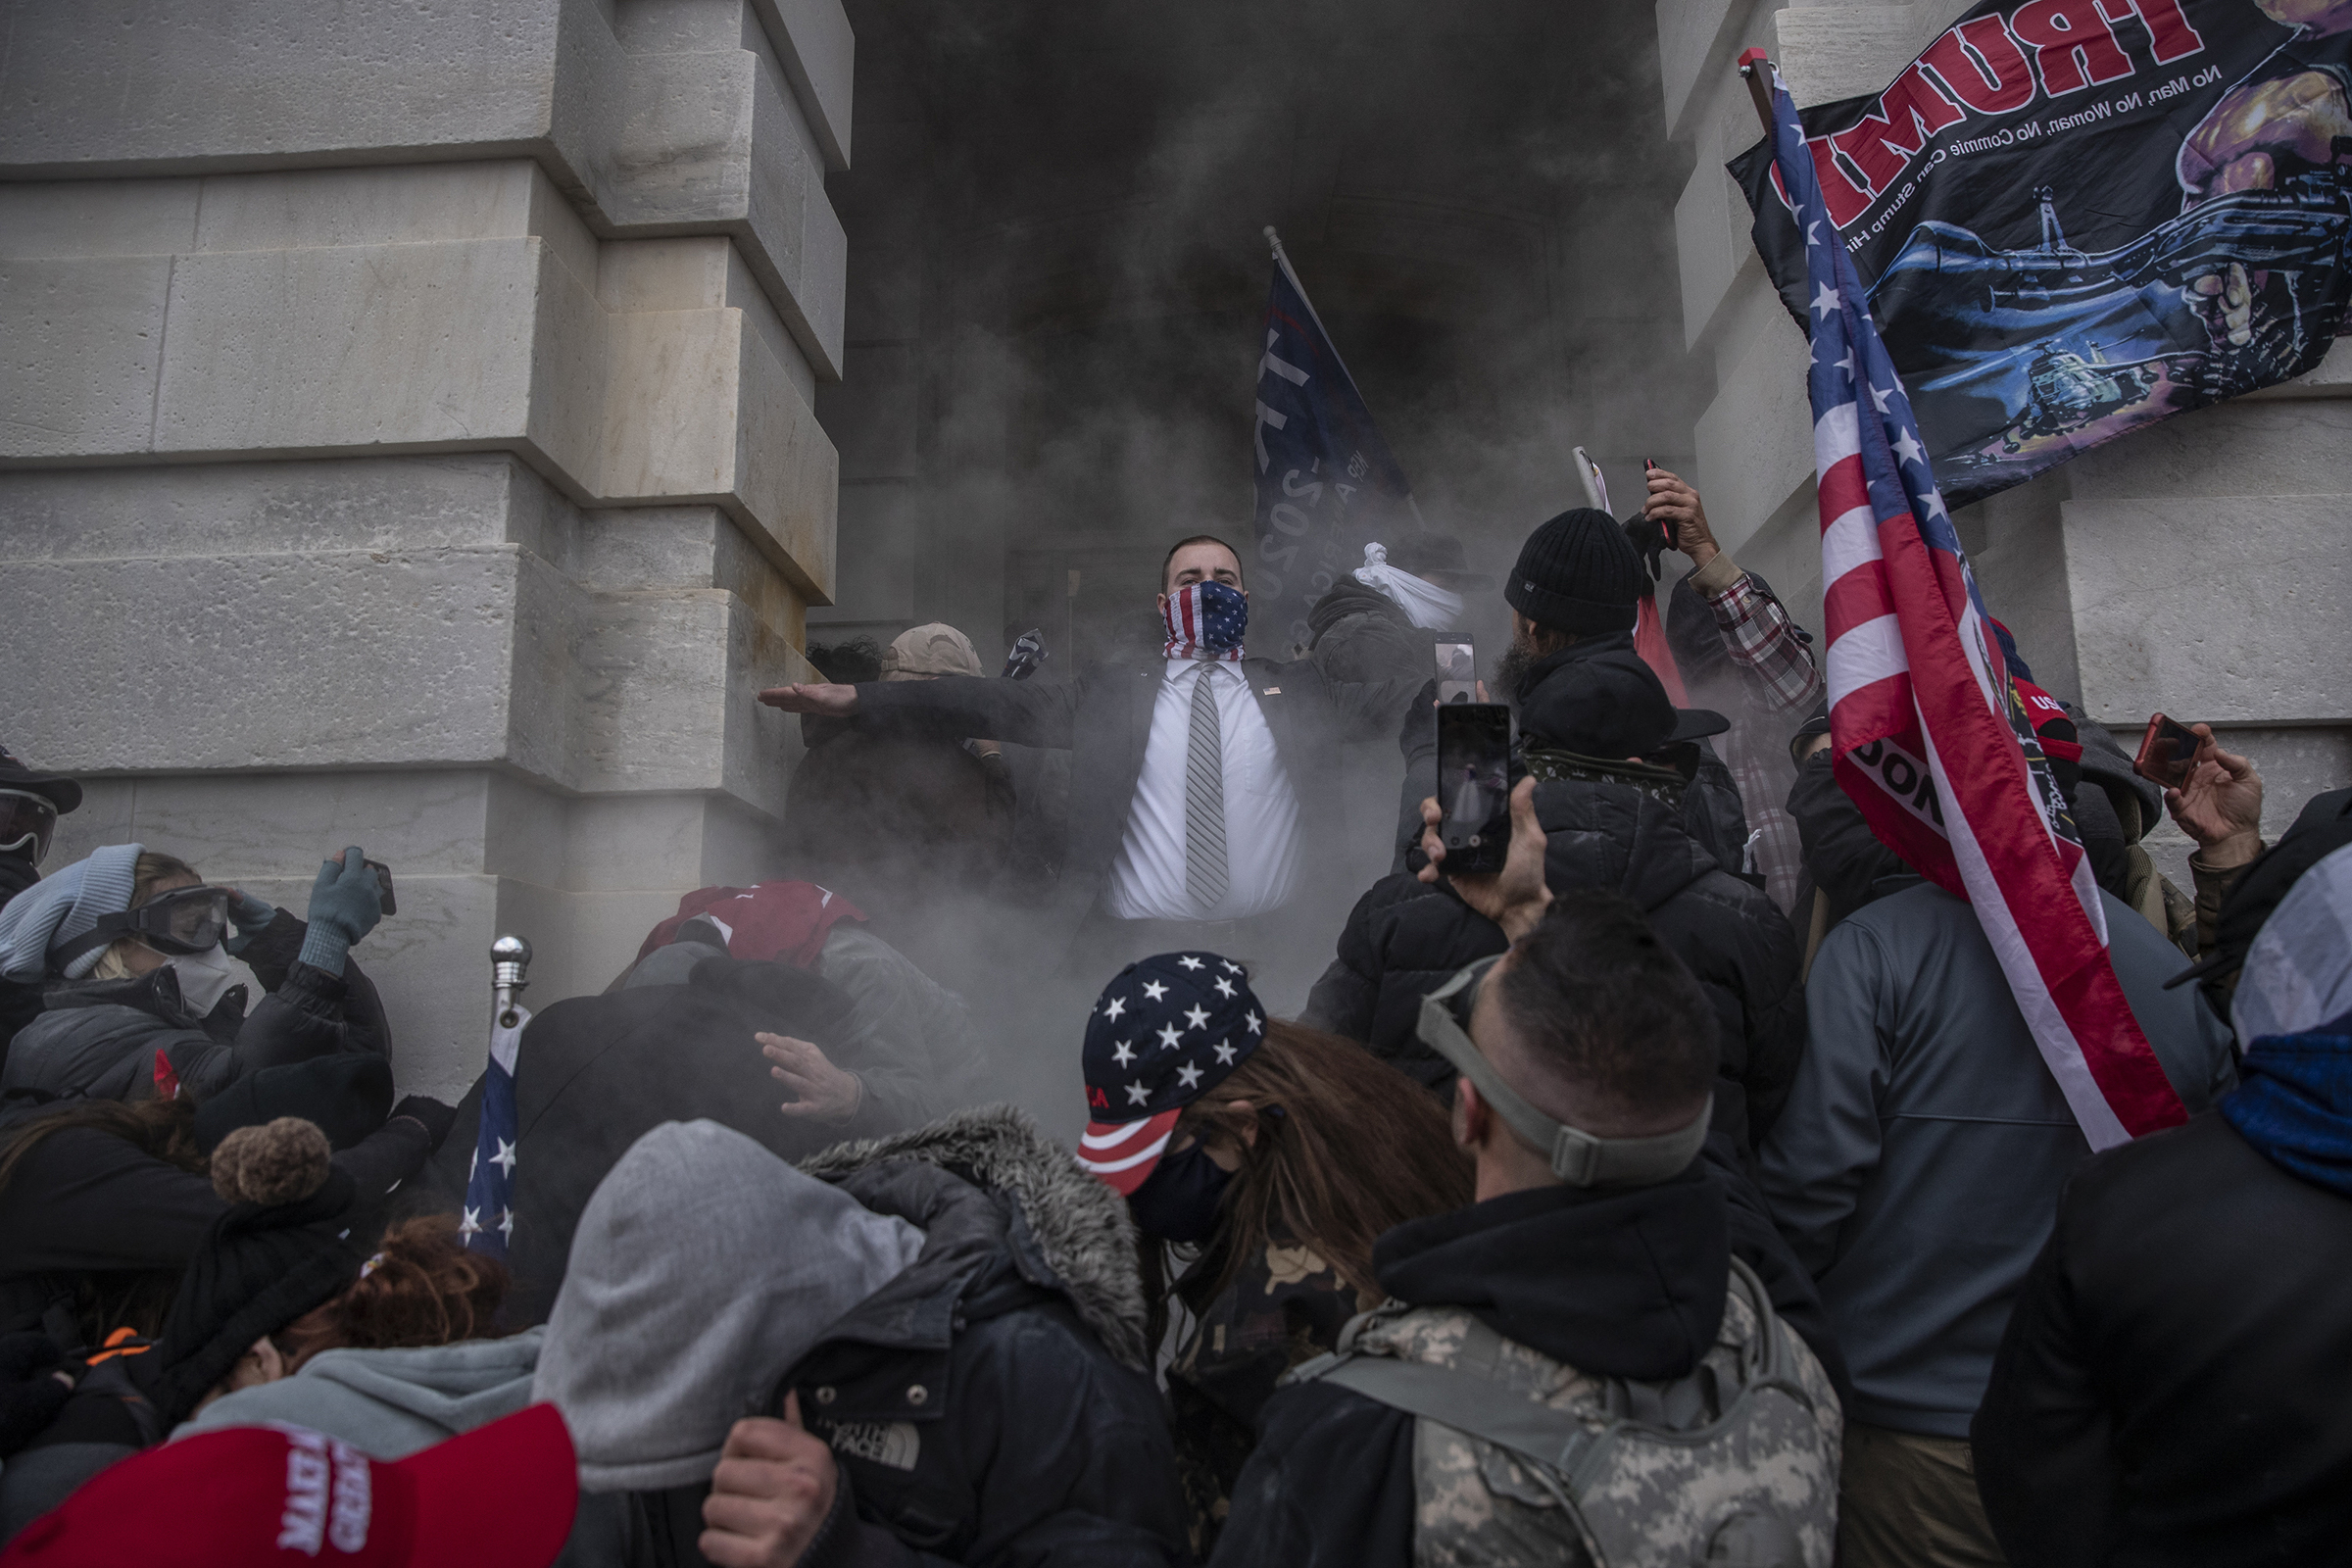 A mob breaches the U.S. Capitol building in Washington, D.C., on Jan. 6. The attack two weeks before the end of President Donald Trump's term resulted in his second impeachment, a week later, by the House for "incitement of insurrection." (Victor J. Blue—Bloomberg/Getty Images)